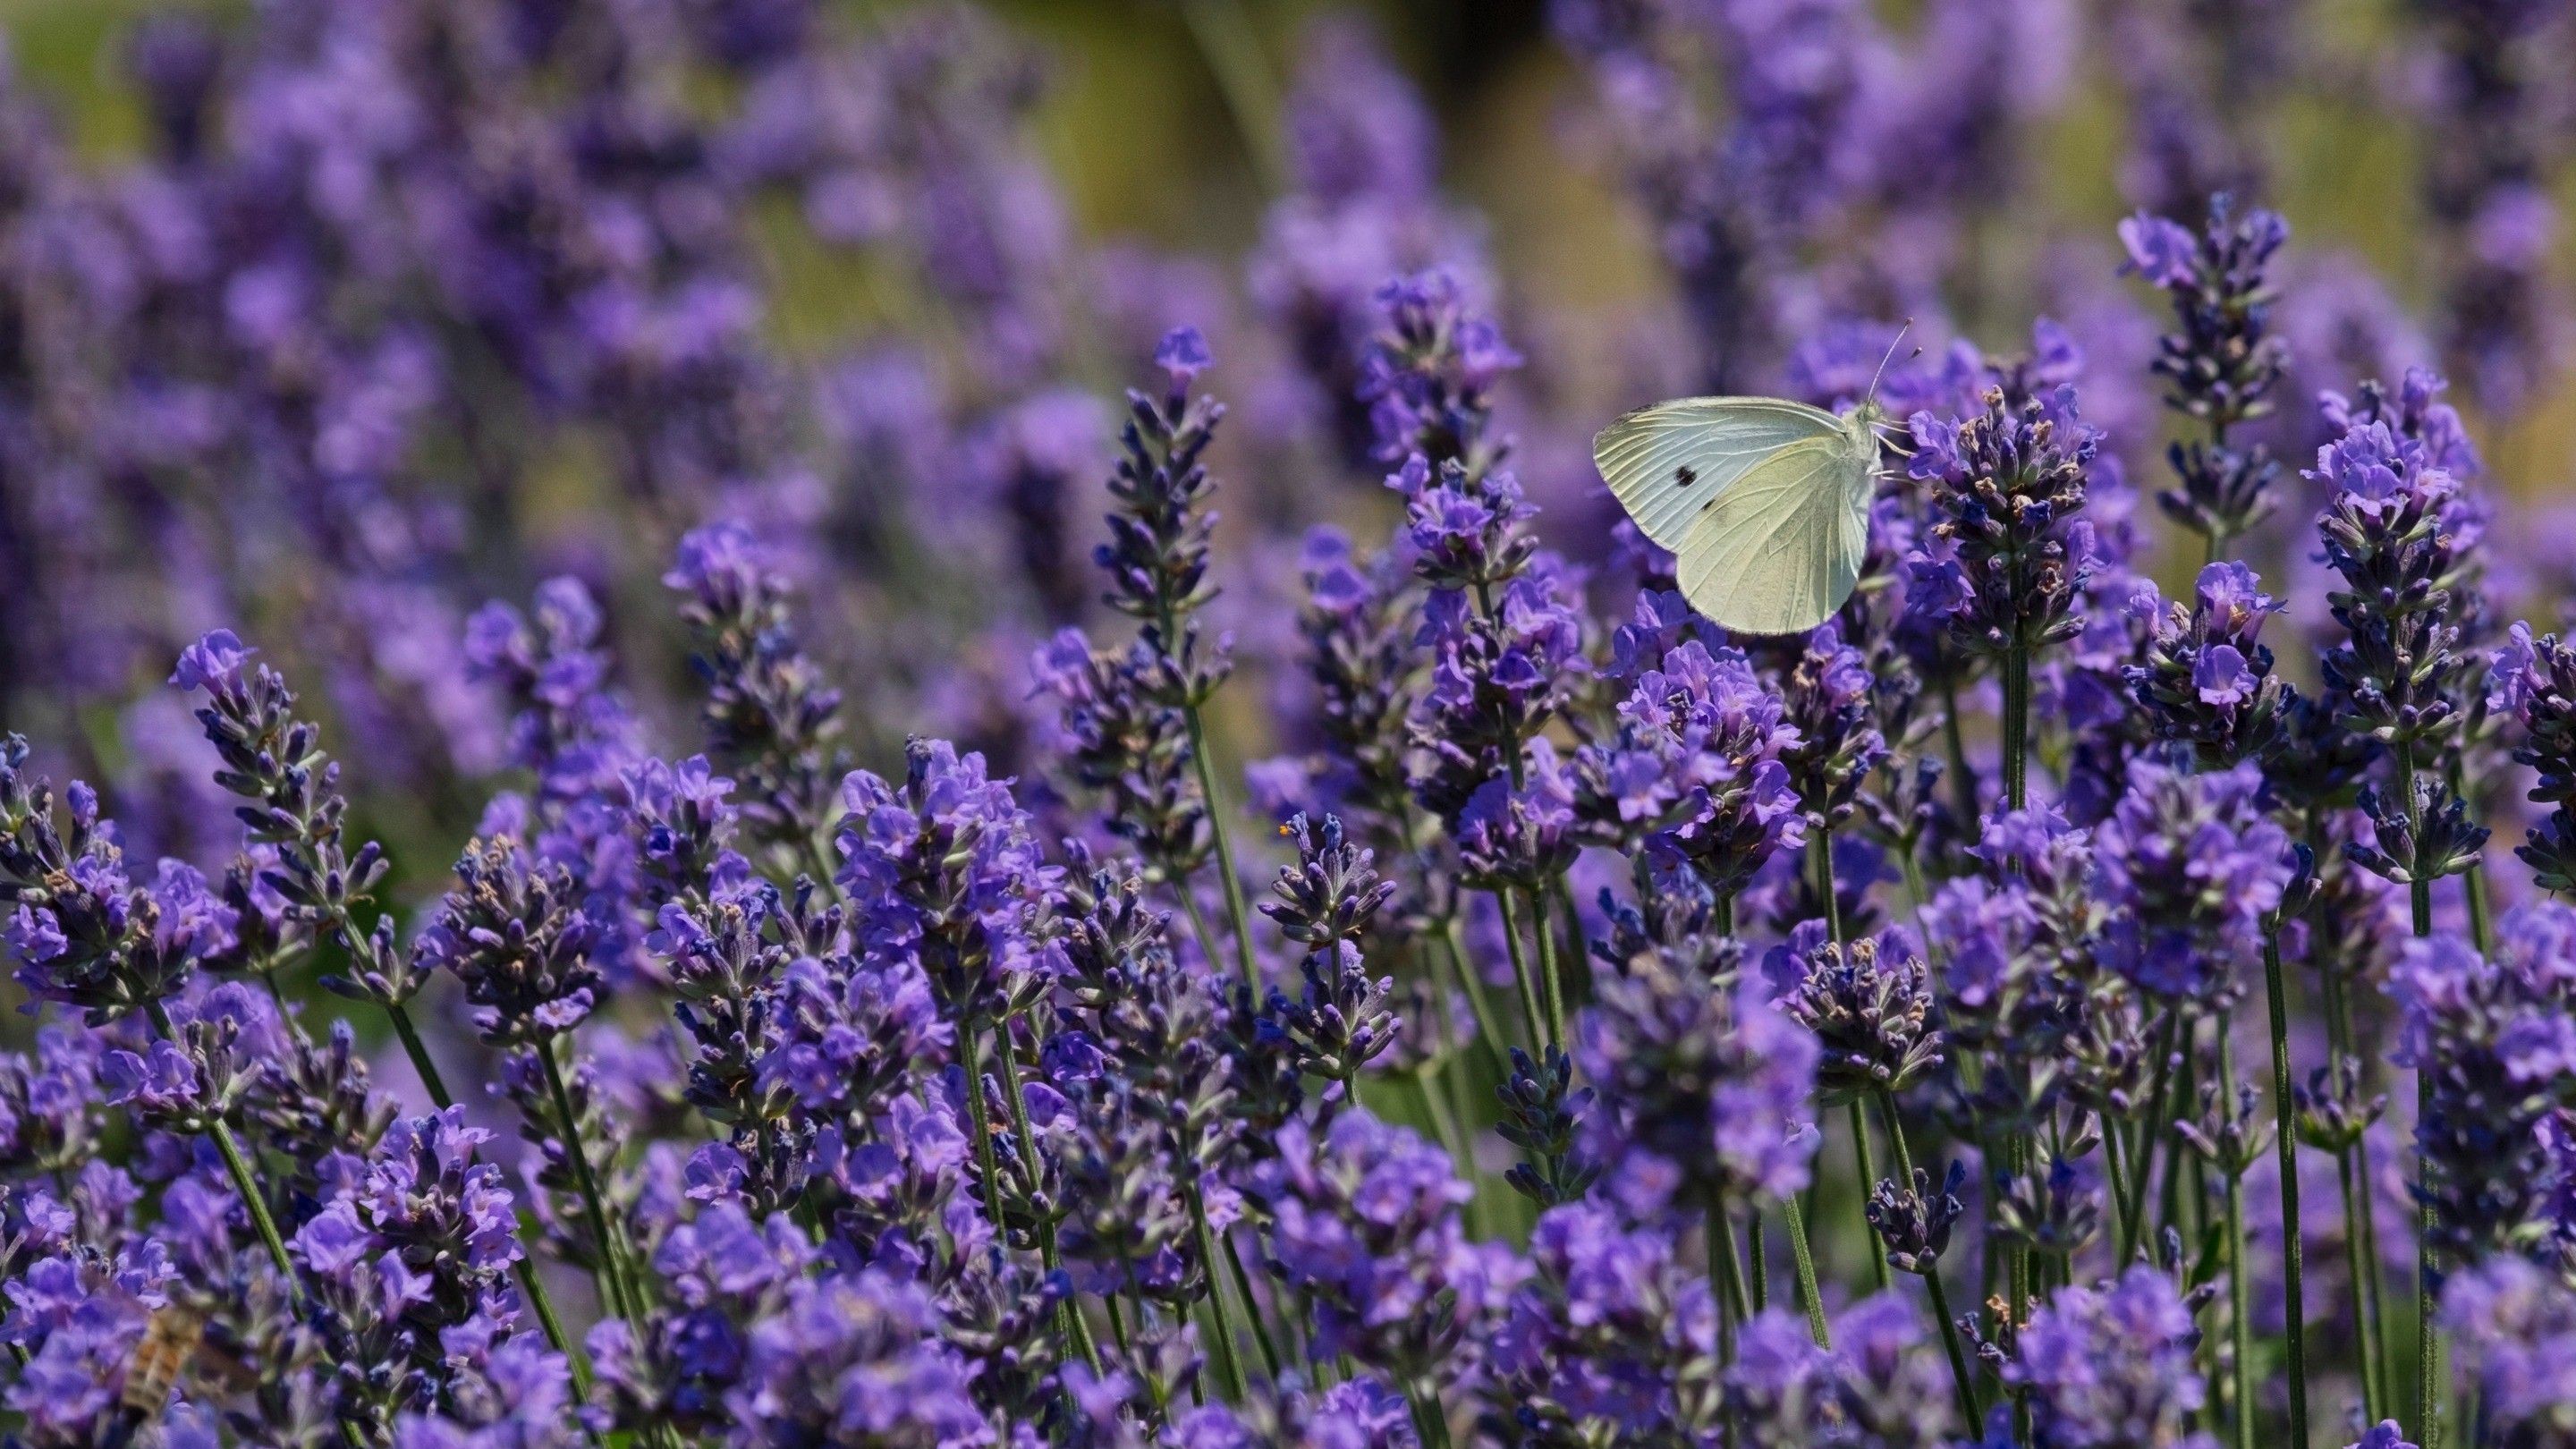 Cute Butterfly Baby on Lavender